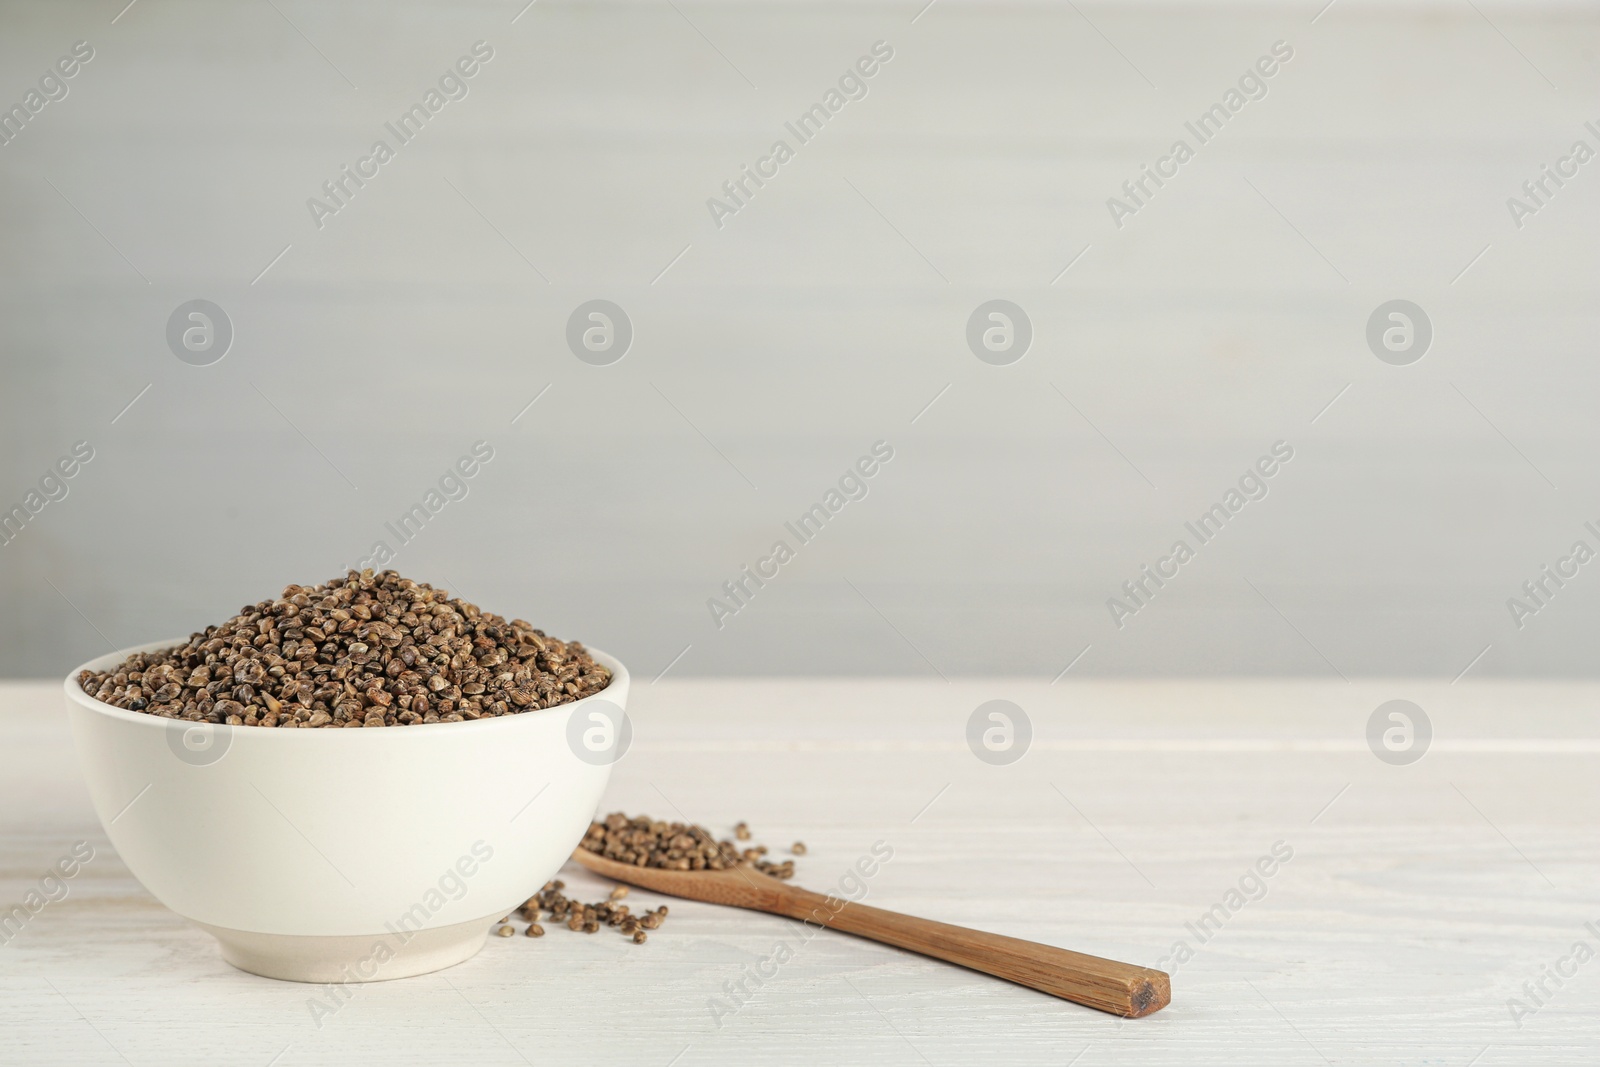 Photo of Ceramic bowl with chia seeds on white wooden table, space for text. Cooking utensils